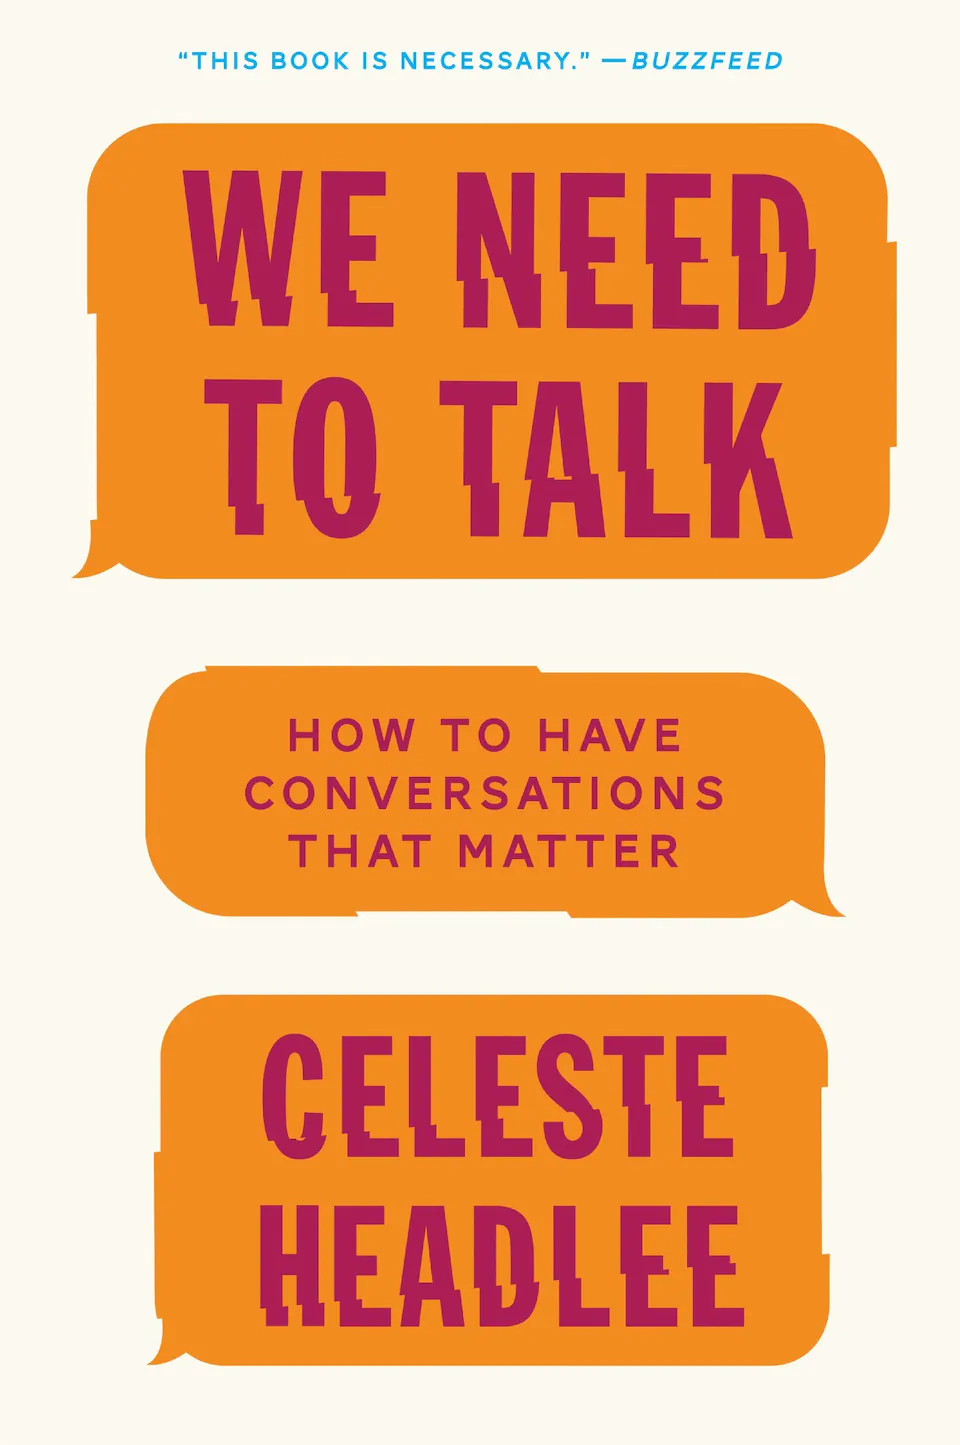 We Need to Talk. How to Have Conversations That Matter by Celeste Headle finished on 2023 Feb 06